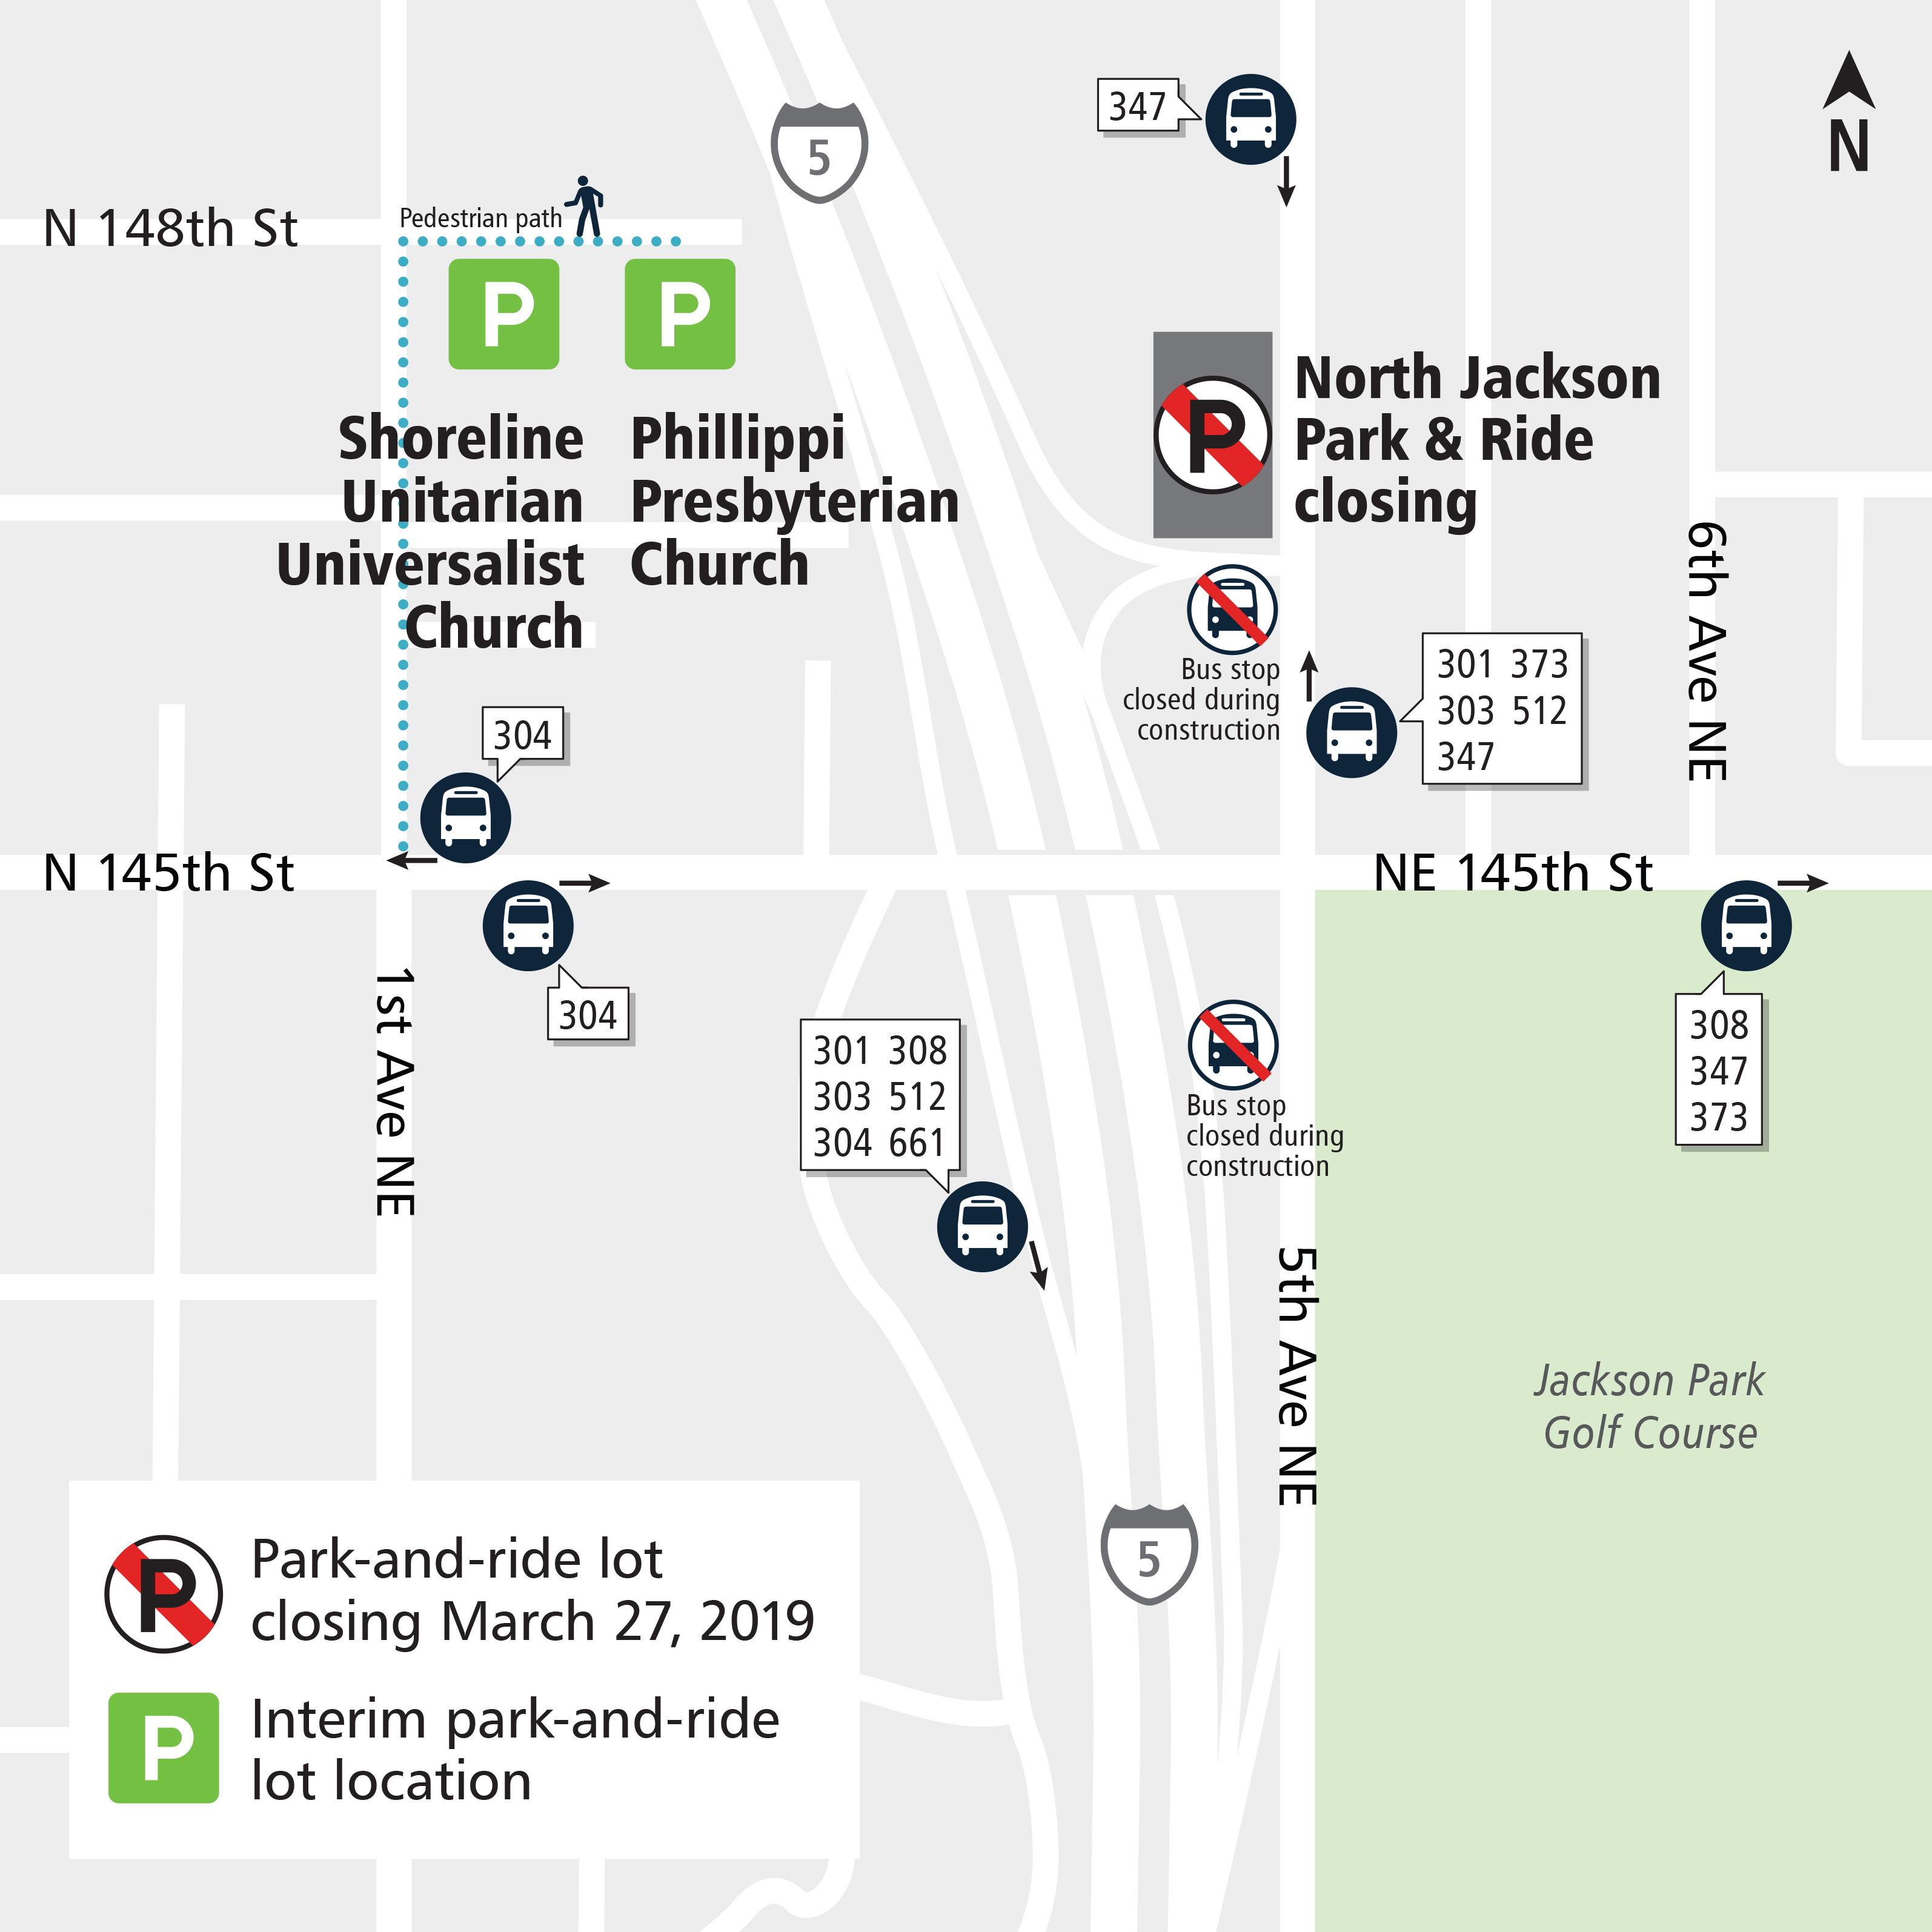 Map of Jackson Park-and-Ride lot closure, March 2019